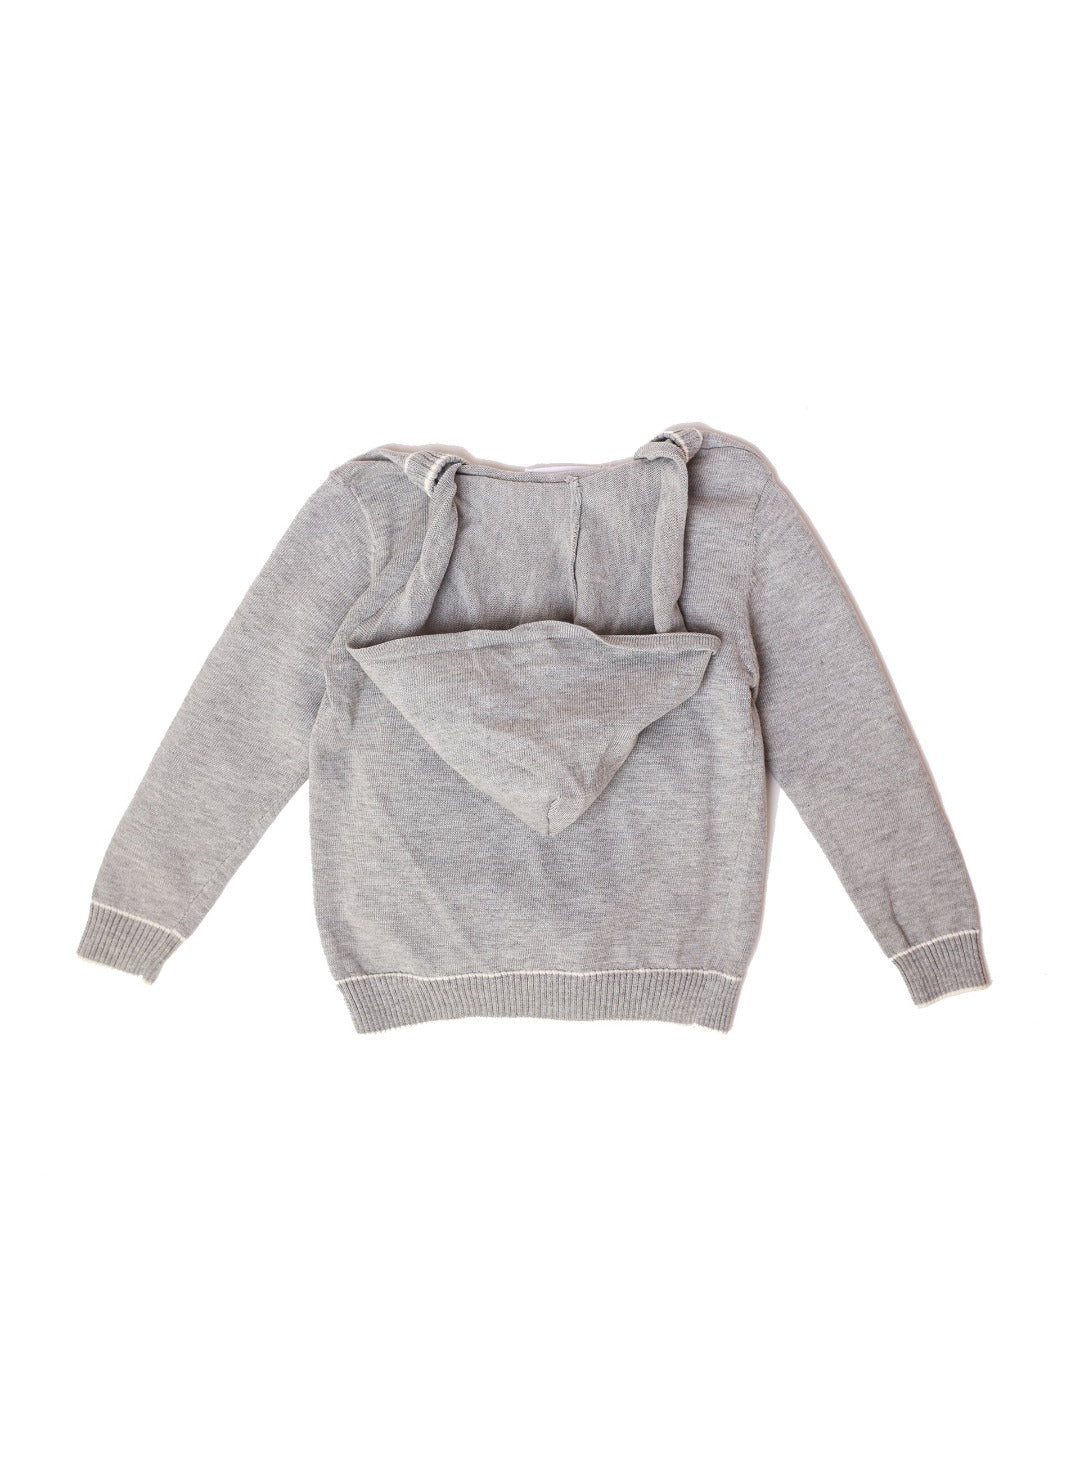 gray cardigan with hoodie